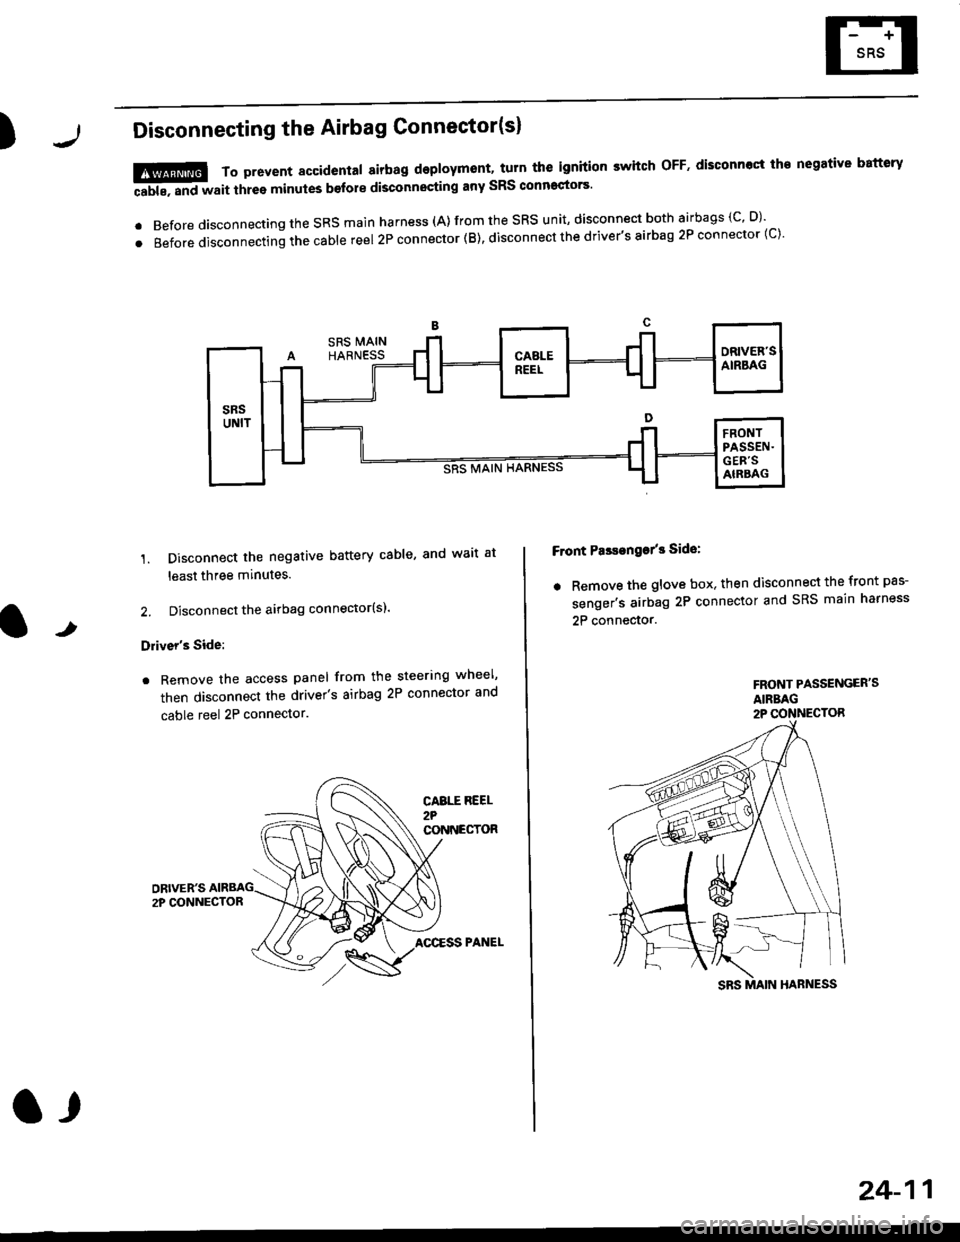 HONDA CIVIC 1996 6.G Owners Manual )Disconnecting the Airbag Connector(sl
1. Disconnect the negative battery cable, and wait at
least three minutes.
2. Disconnect the airbag connector(sl.
Drivers Side:
. Remove the access panel from 